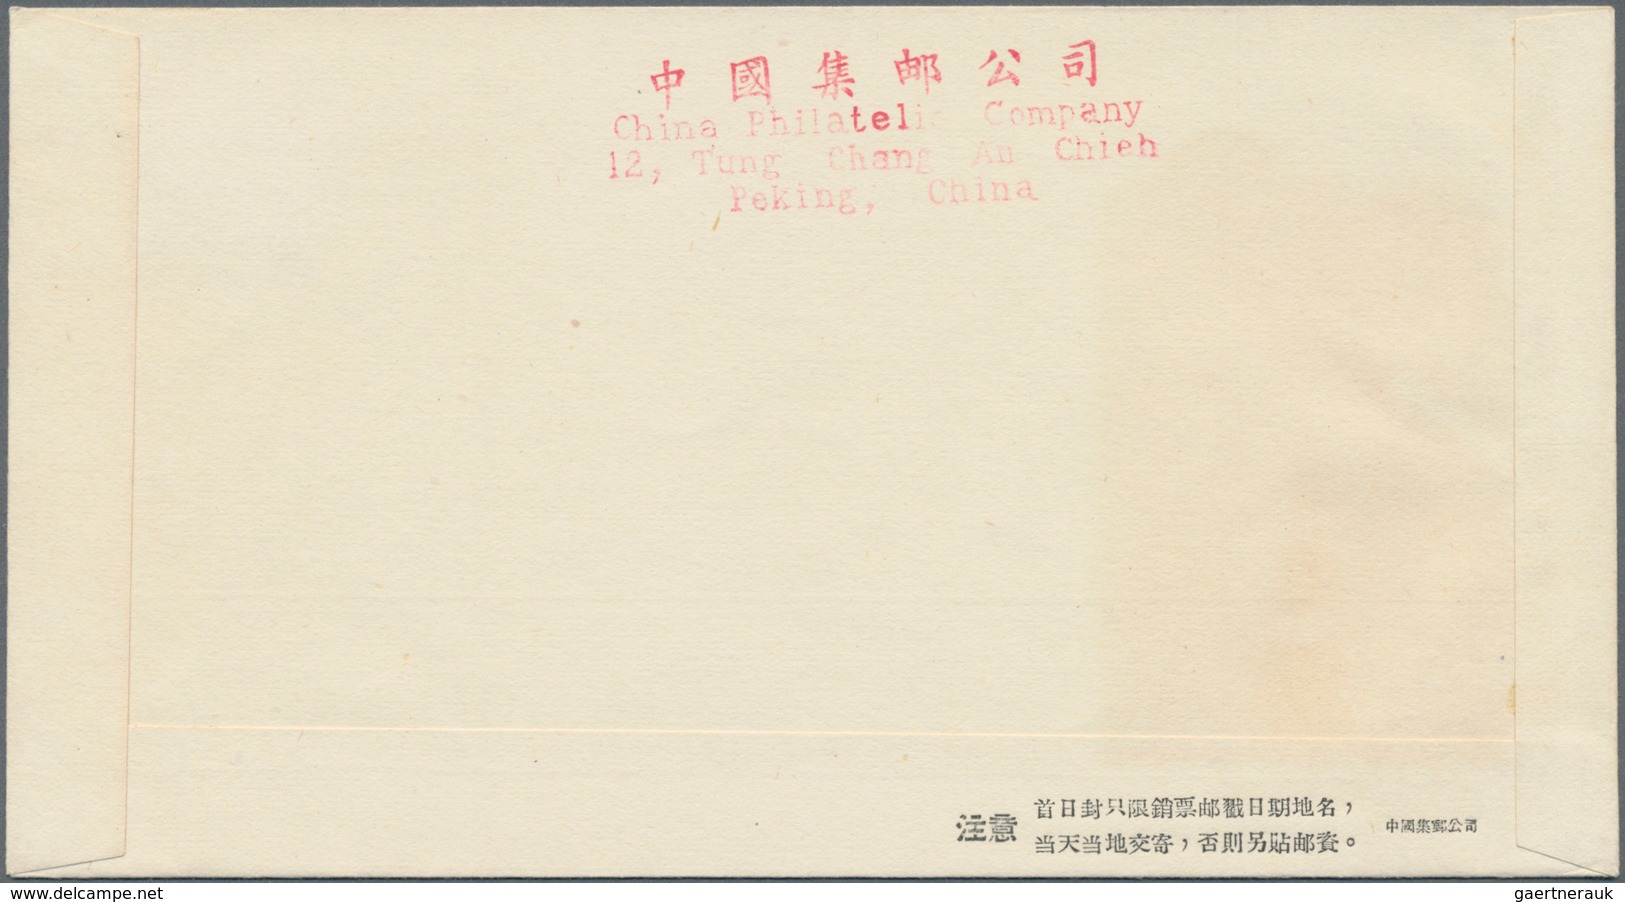 China - Volksrepublik: 1959, 7 First Day covers of C62, C63, C65, C66, S33, S35, bearing the 6 full